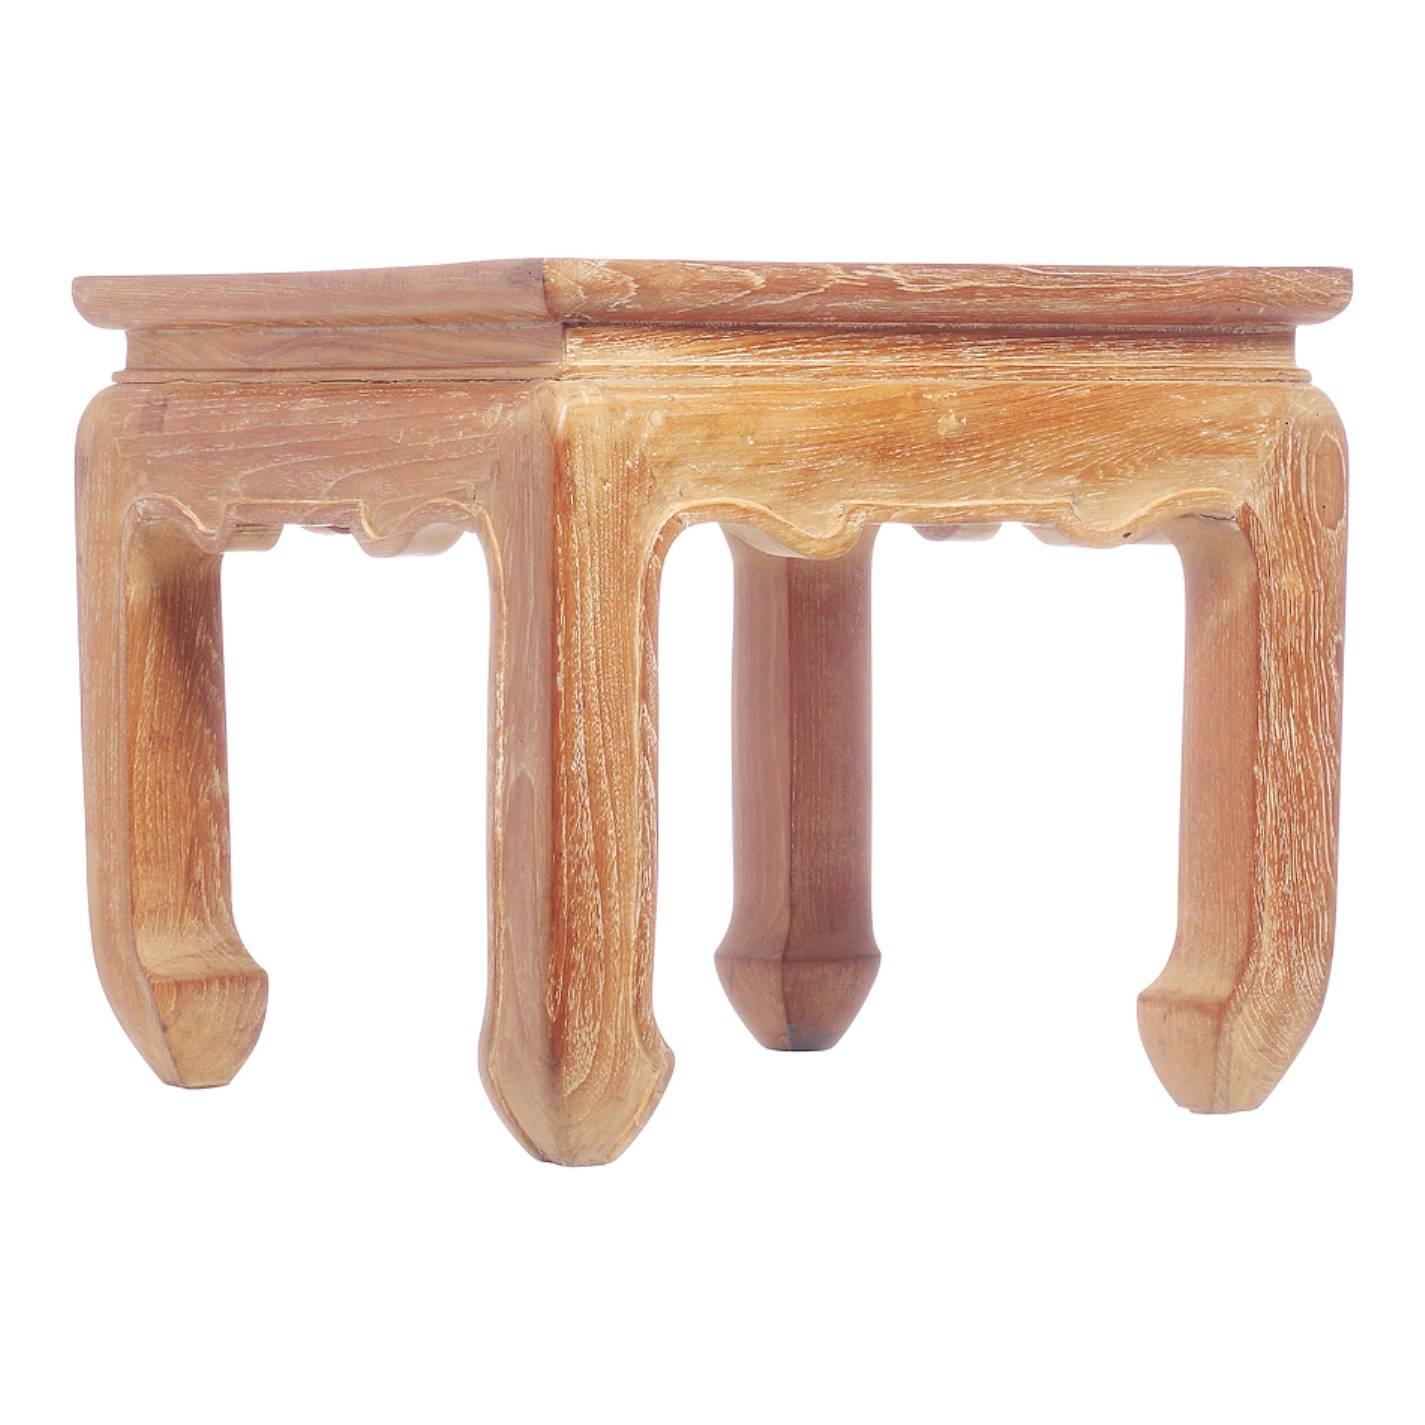 This 20th century Thai small side table was made with bleached teakwood. The table adopts a cubic shape with a recess and a brace panel under its square top. The four legs are curved on their extremities and adorned with a carved lip on their inner